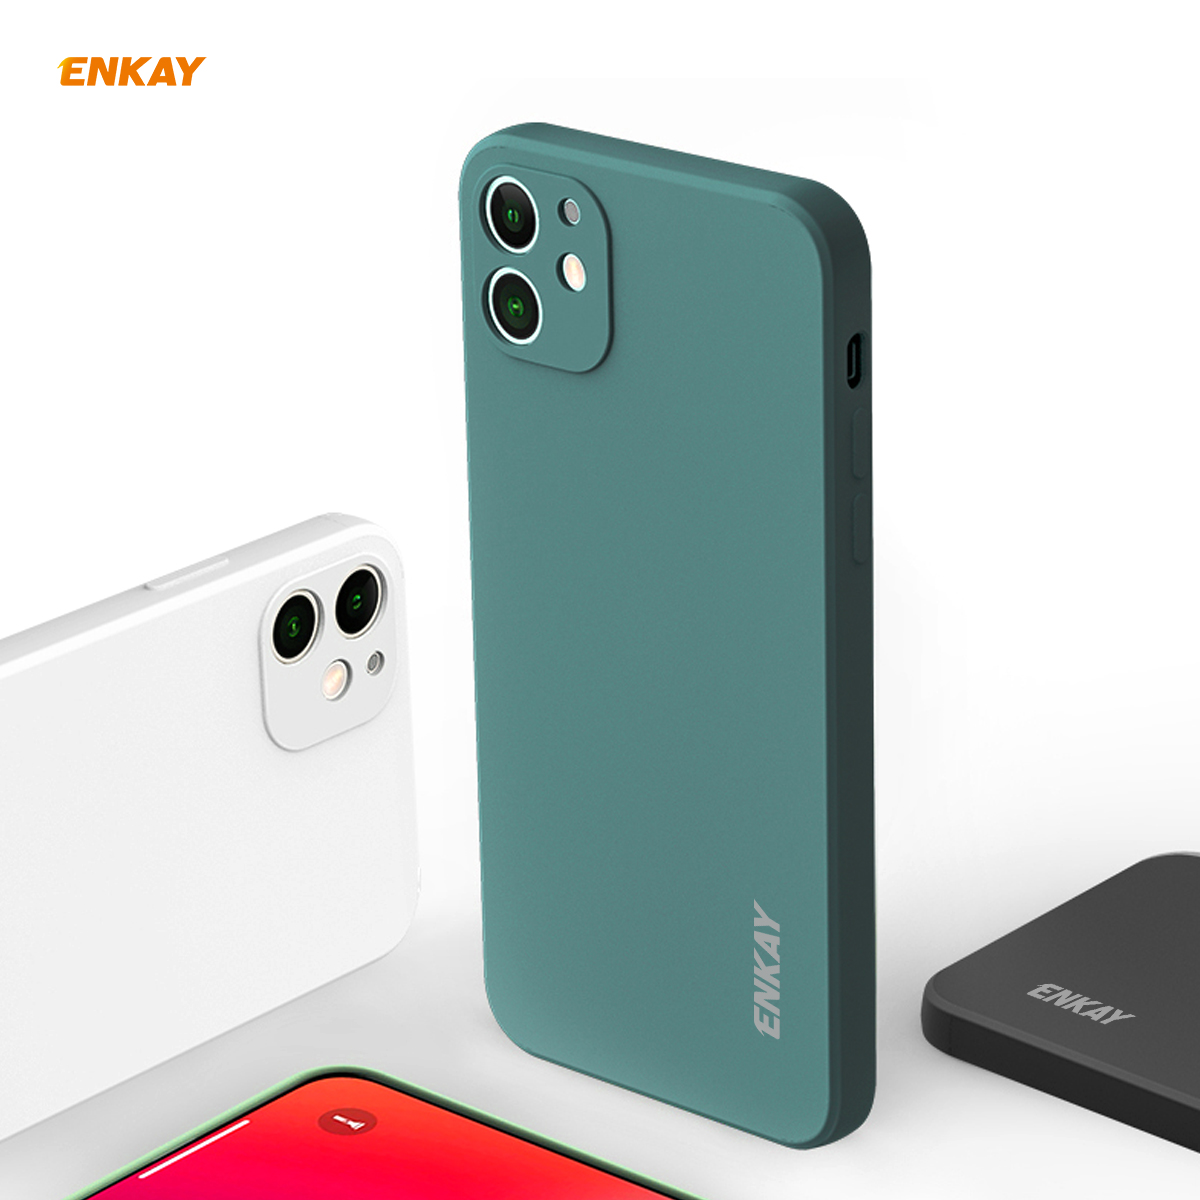 Enkay-2-in-1-for-iPhone-12-Accessories-Shockproof-with-Lens-Protector-Soft-Liquid-Silicone-Rubber-Pr-1772523-2